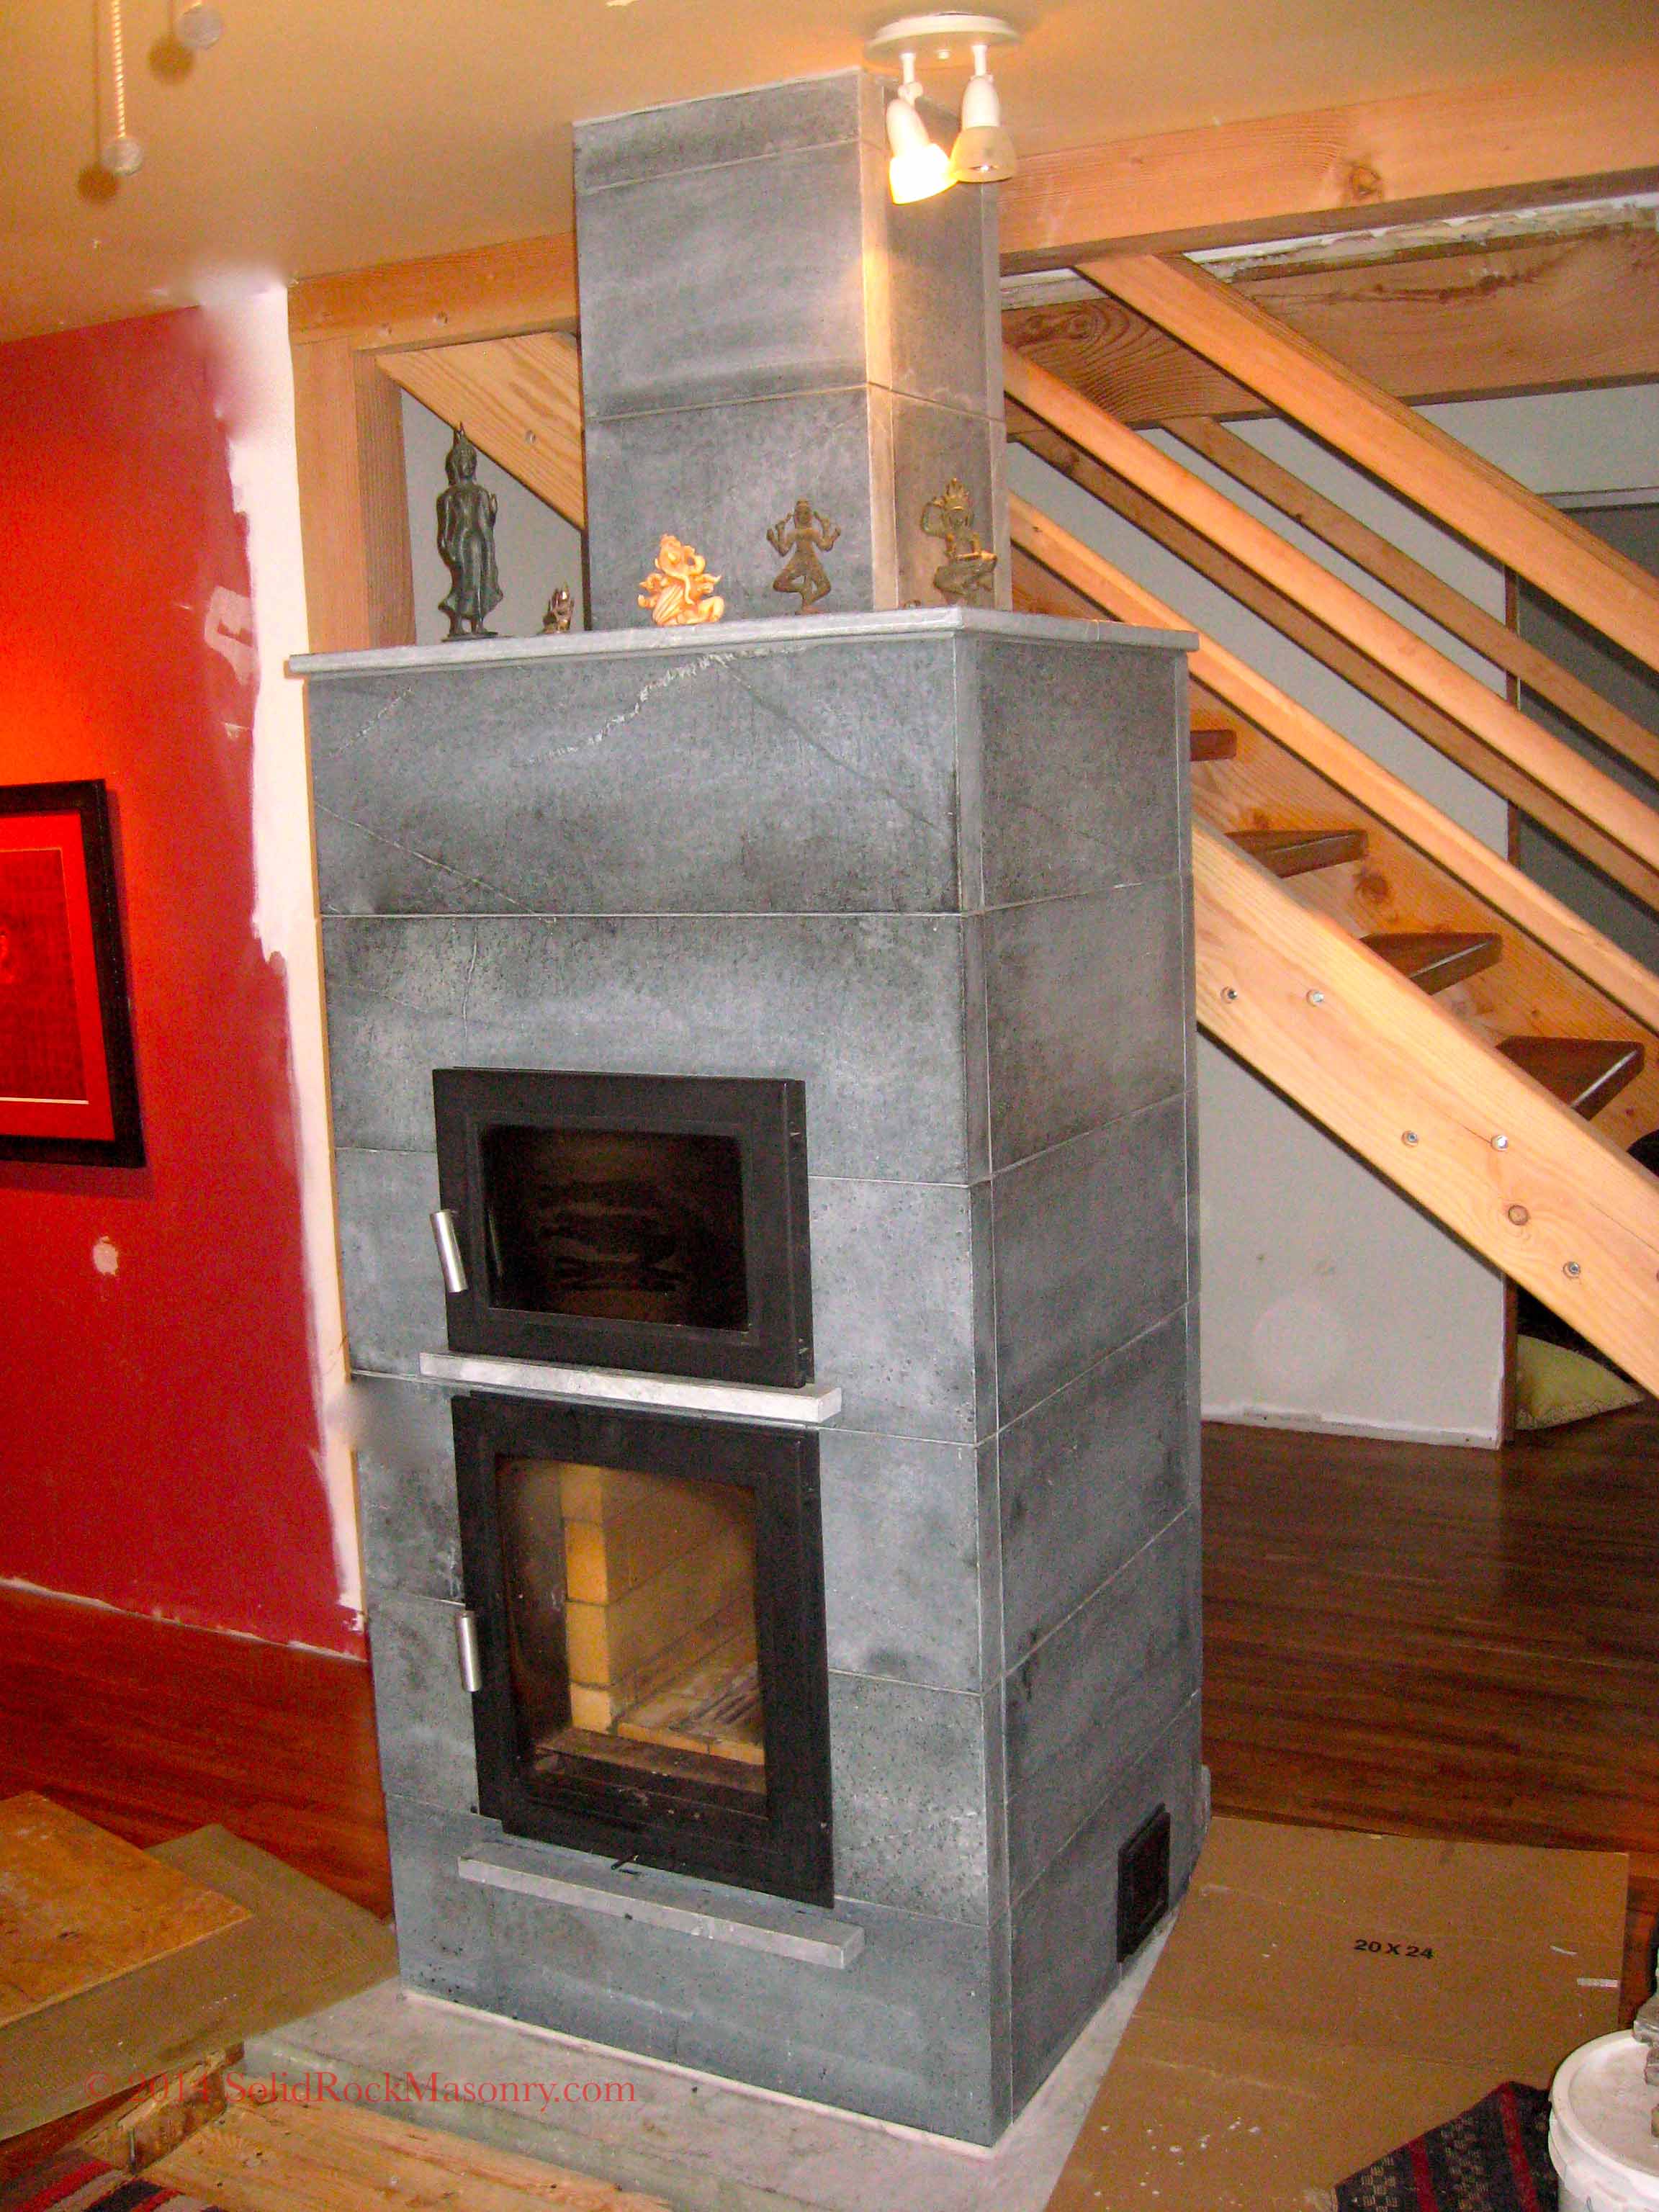 Cosgrove SR-15 hybrid soapstone heater with black oven